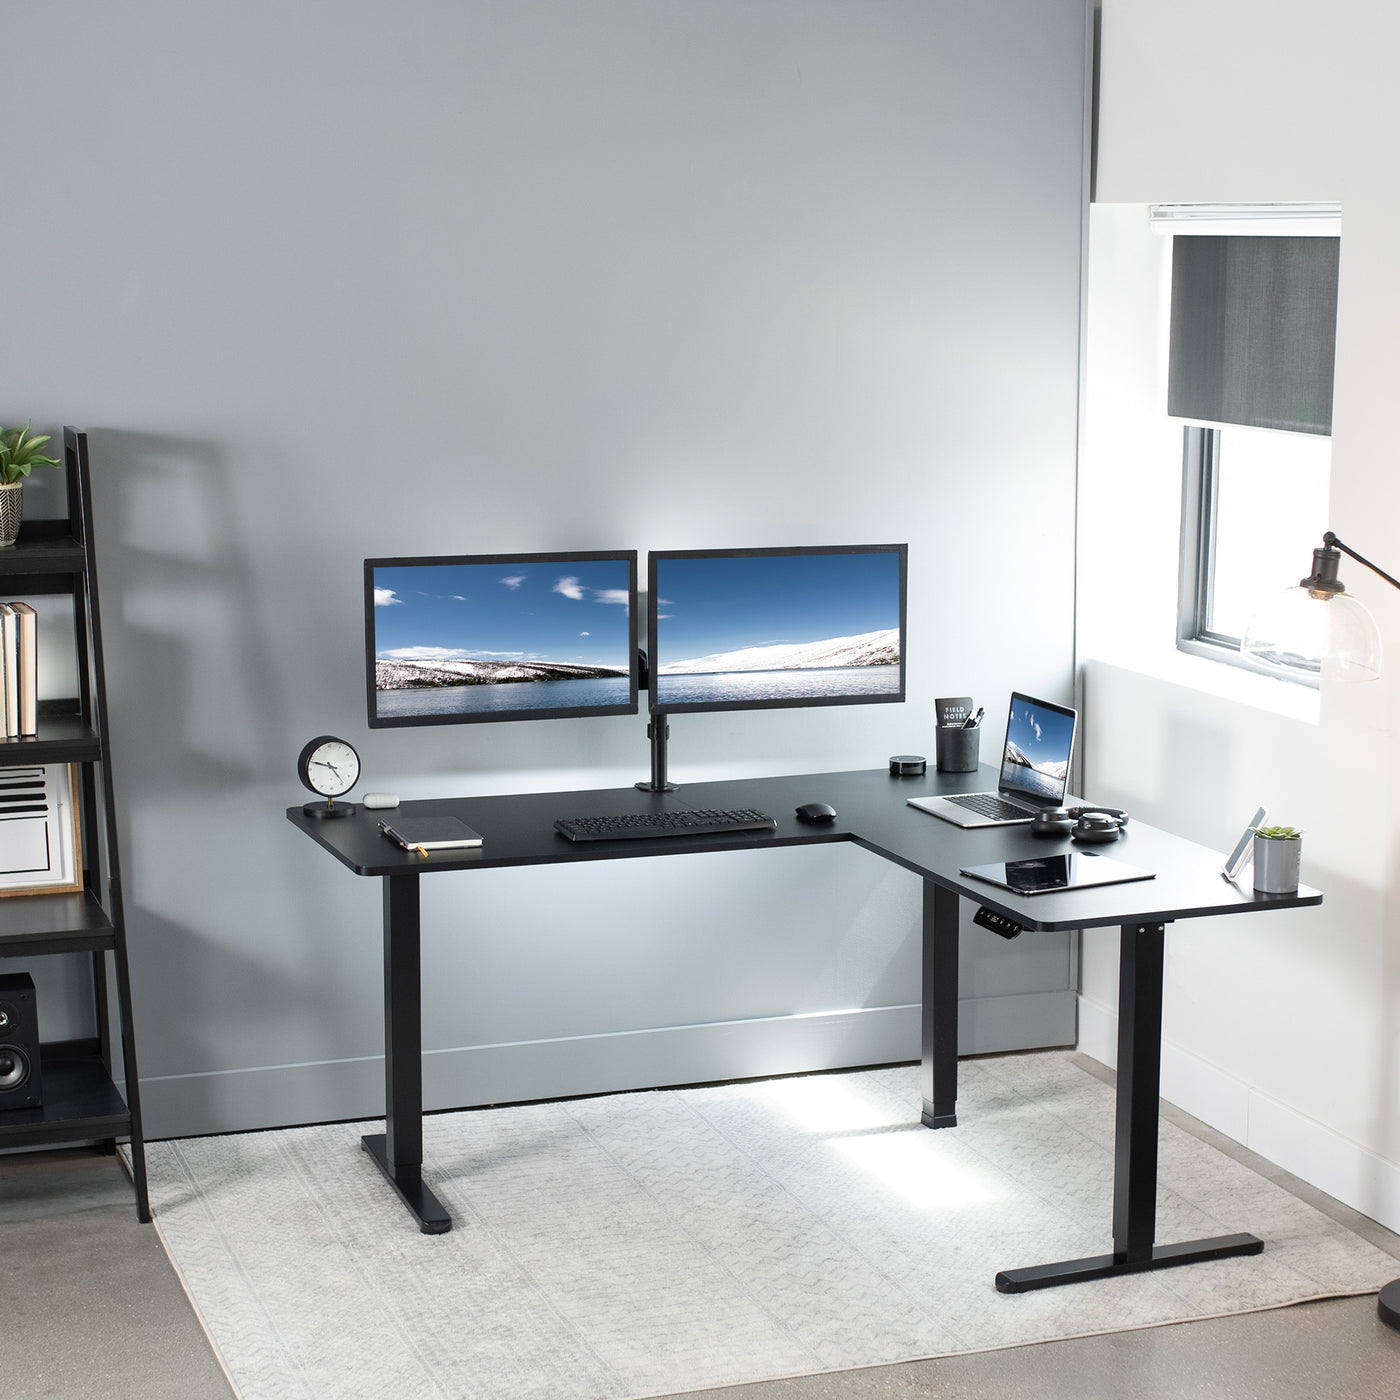 Modern working office with an ergonomic sit to stand L-shape desk by a window.